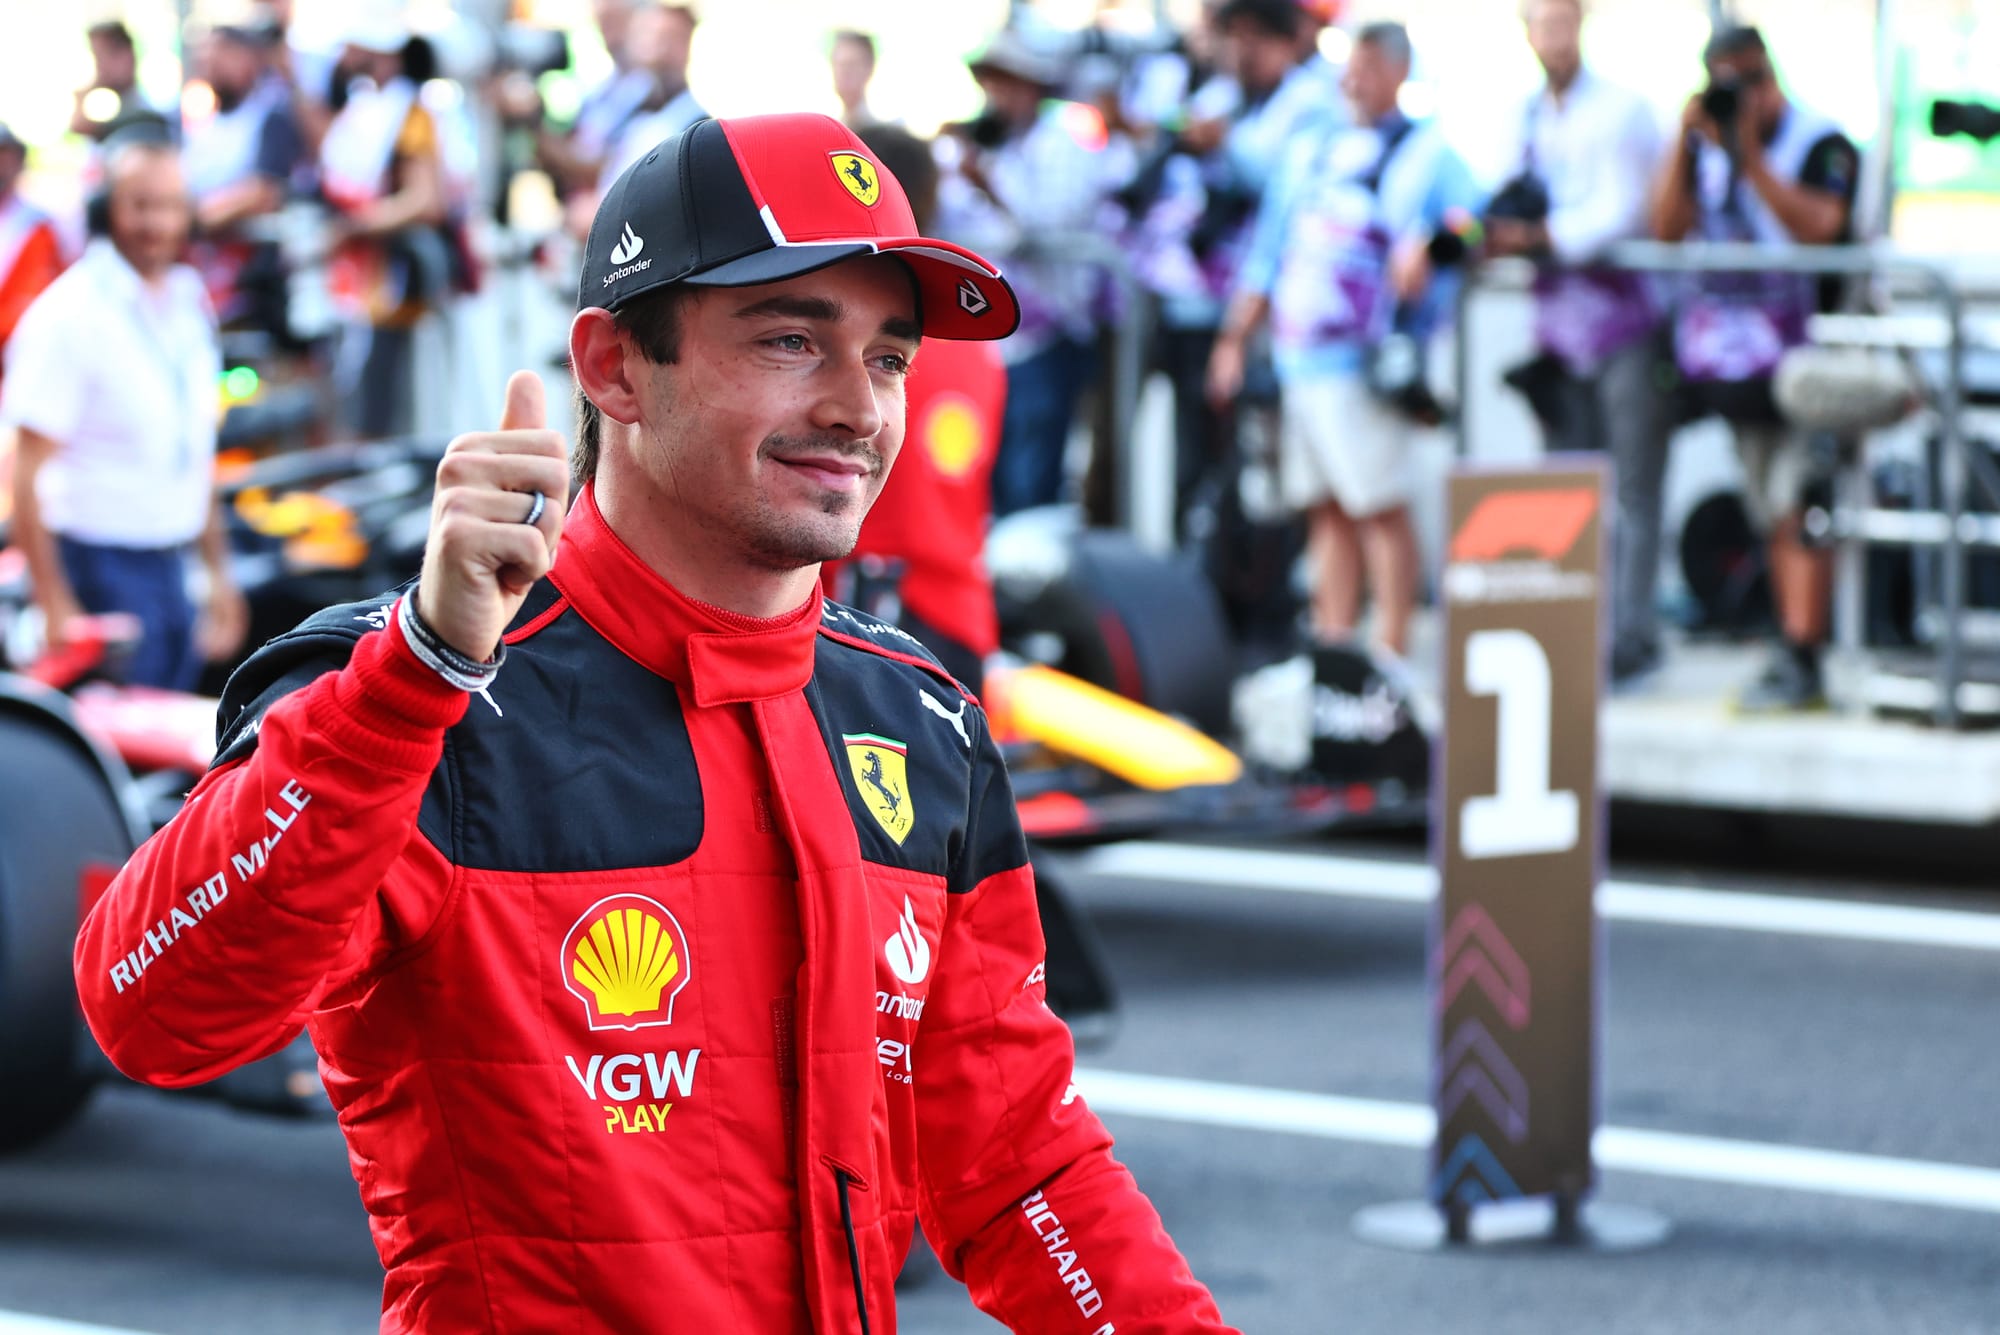 Leclerc's absurd F1 ratio is criminally undeserved - The Race